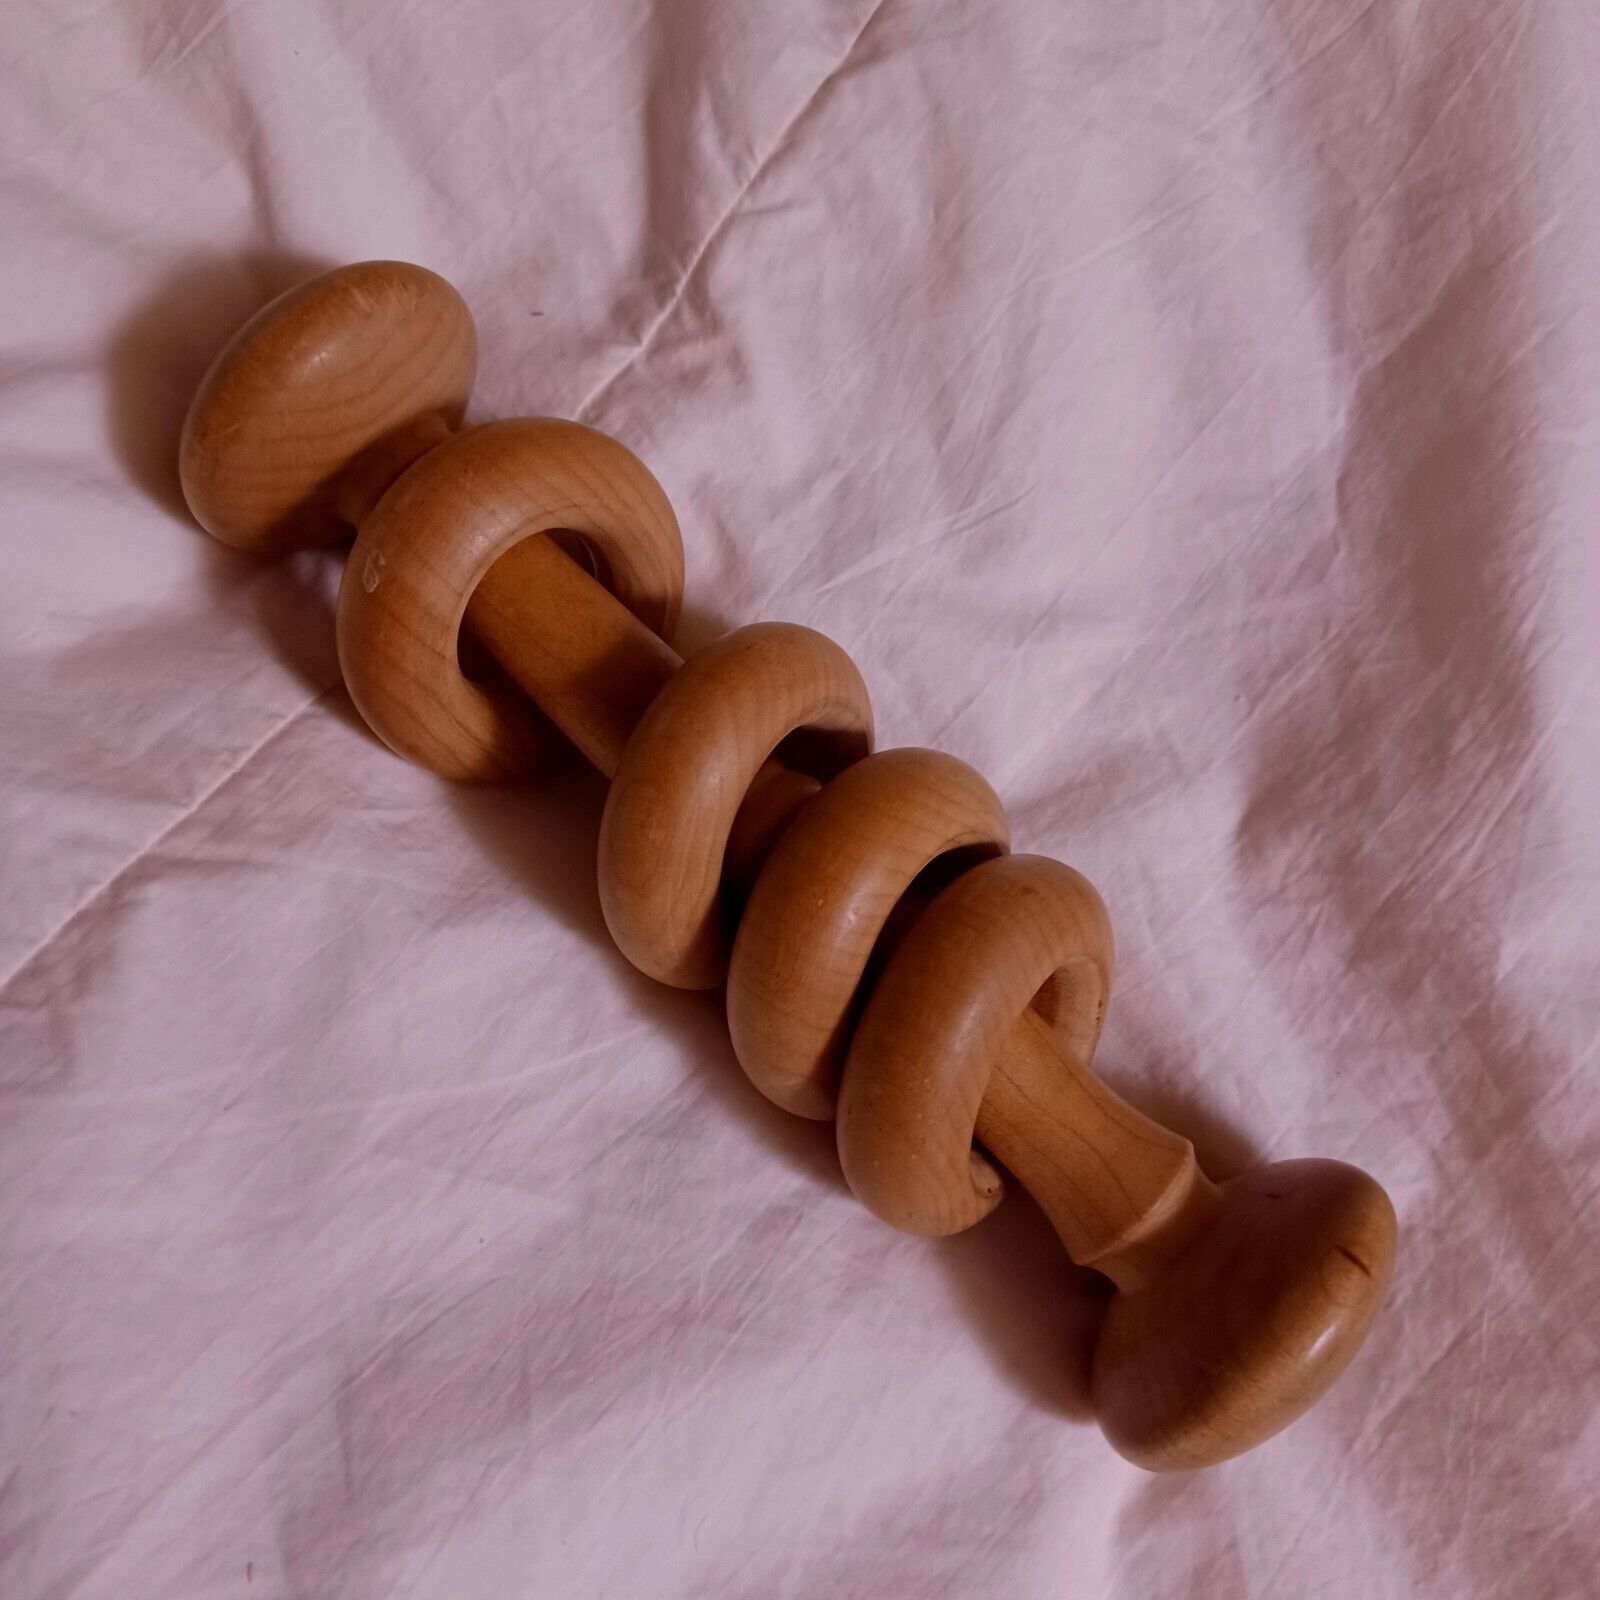 Heirloom Vintage Carved Wooden Baby Rattle Toy One Piece Hard Wood All Natural